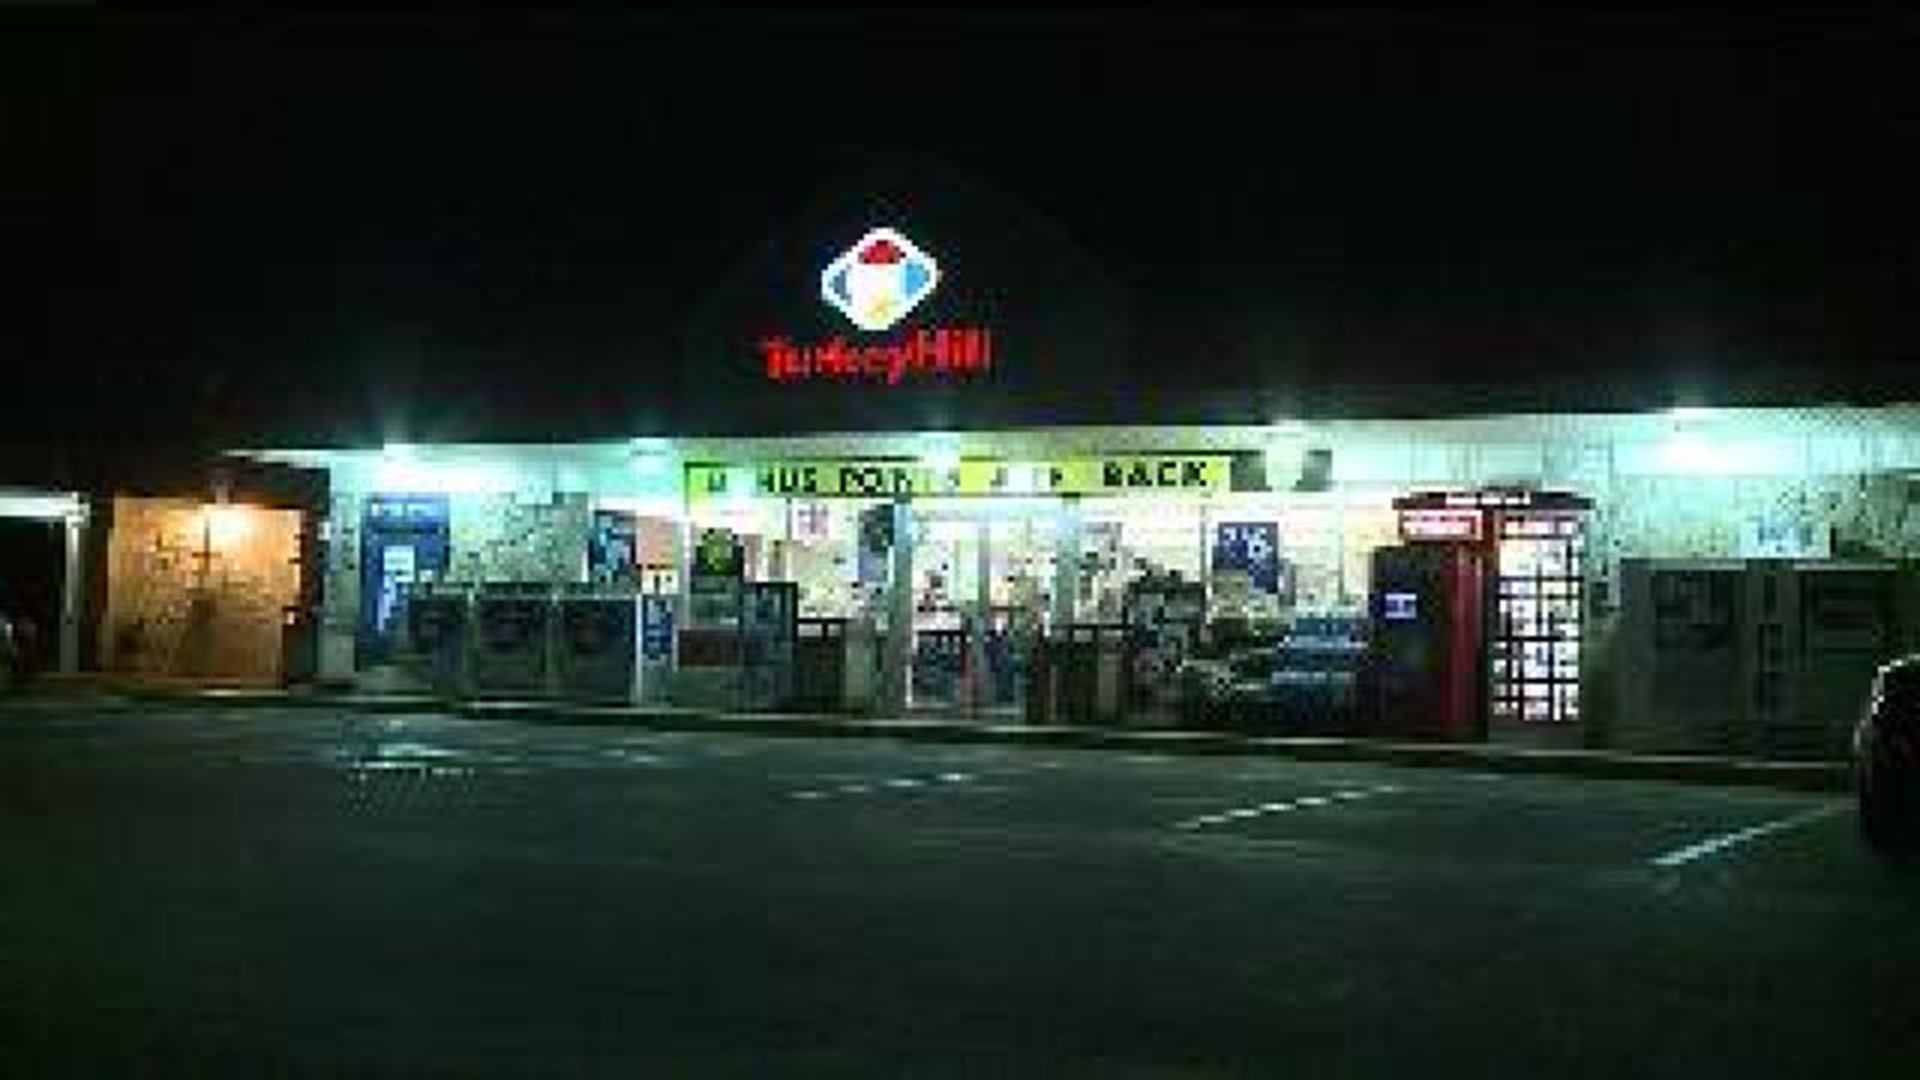 Robber Hits Turkey Hill in Wilkes-Barre